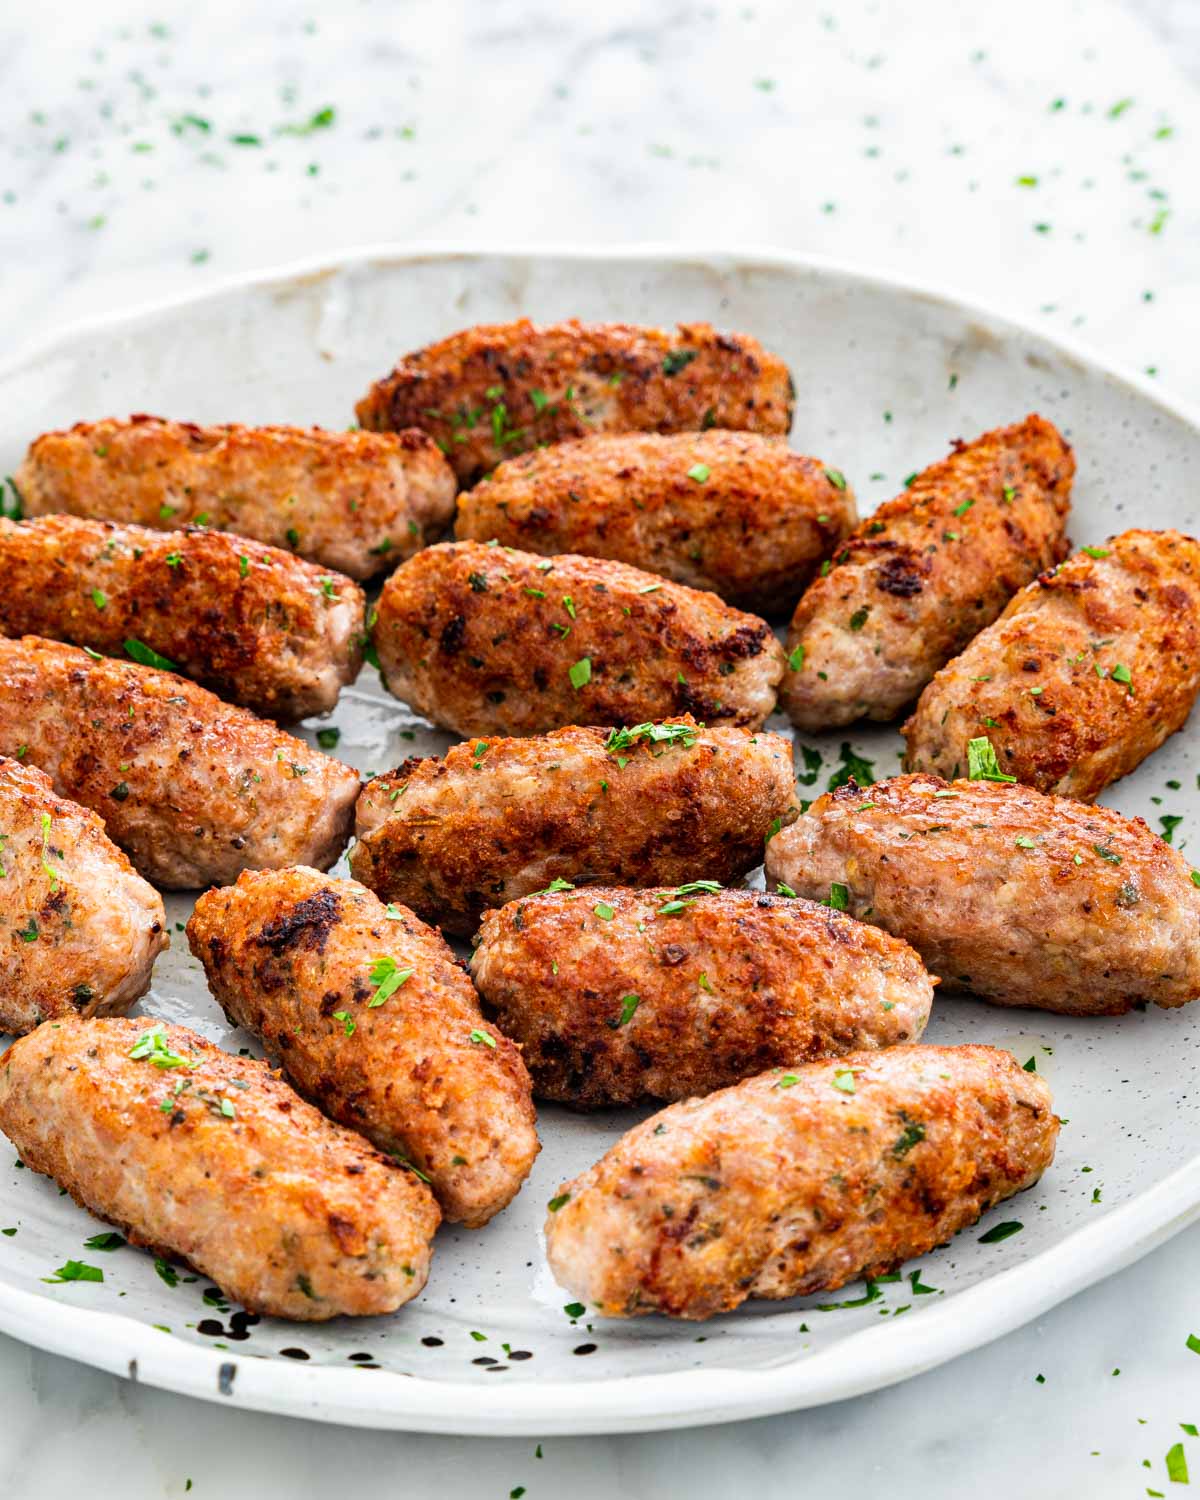 pork sausages on a plate